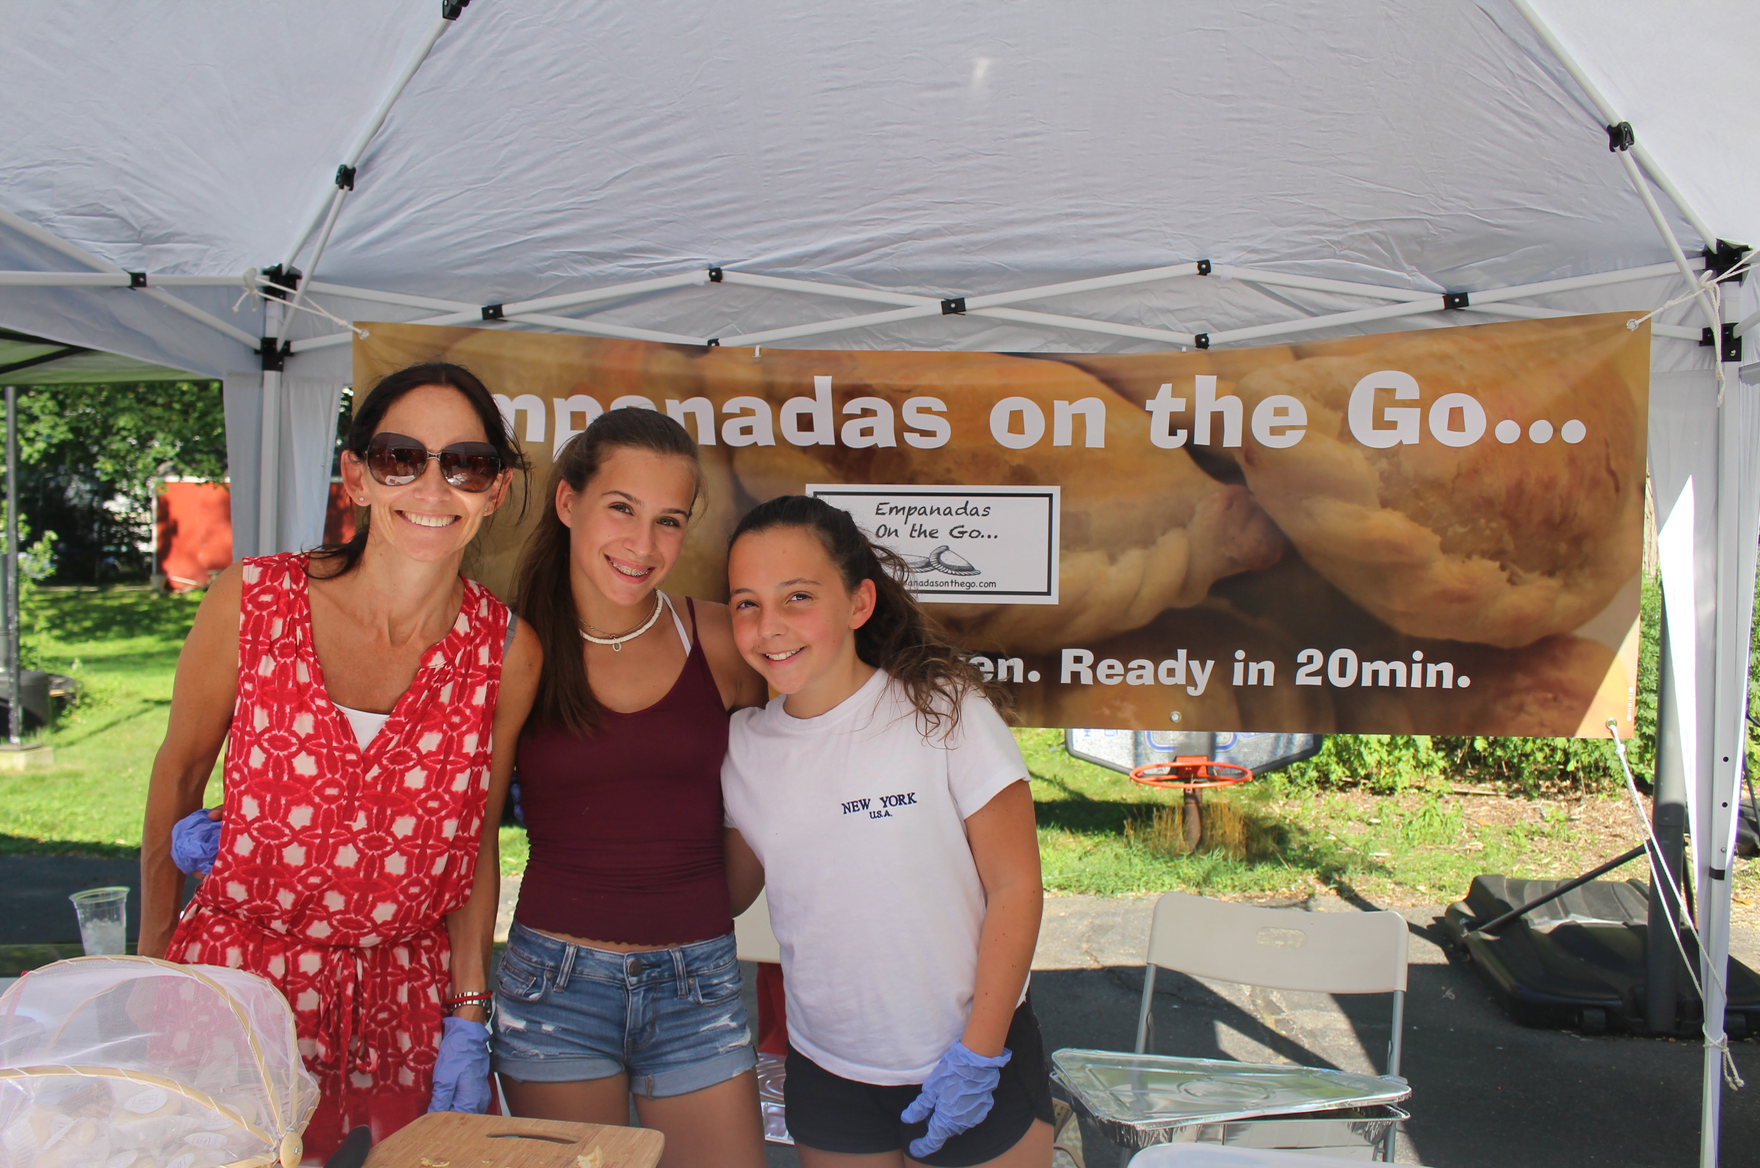 Jackie Mendive's Empanadas on the Go is a new presence at the Wednesday afternoon Old Greenwich Farmers Market. July 19, 2017 Photo: Leslie Yager